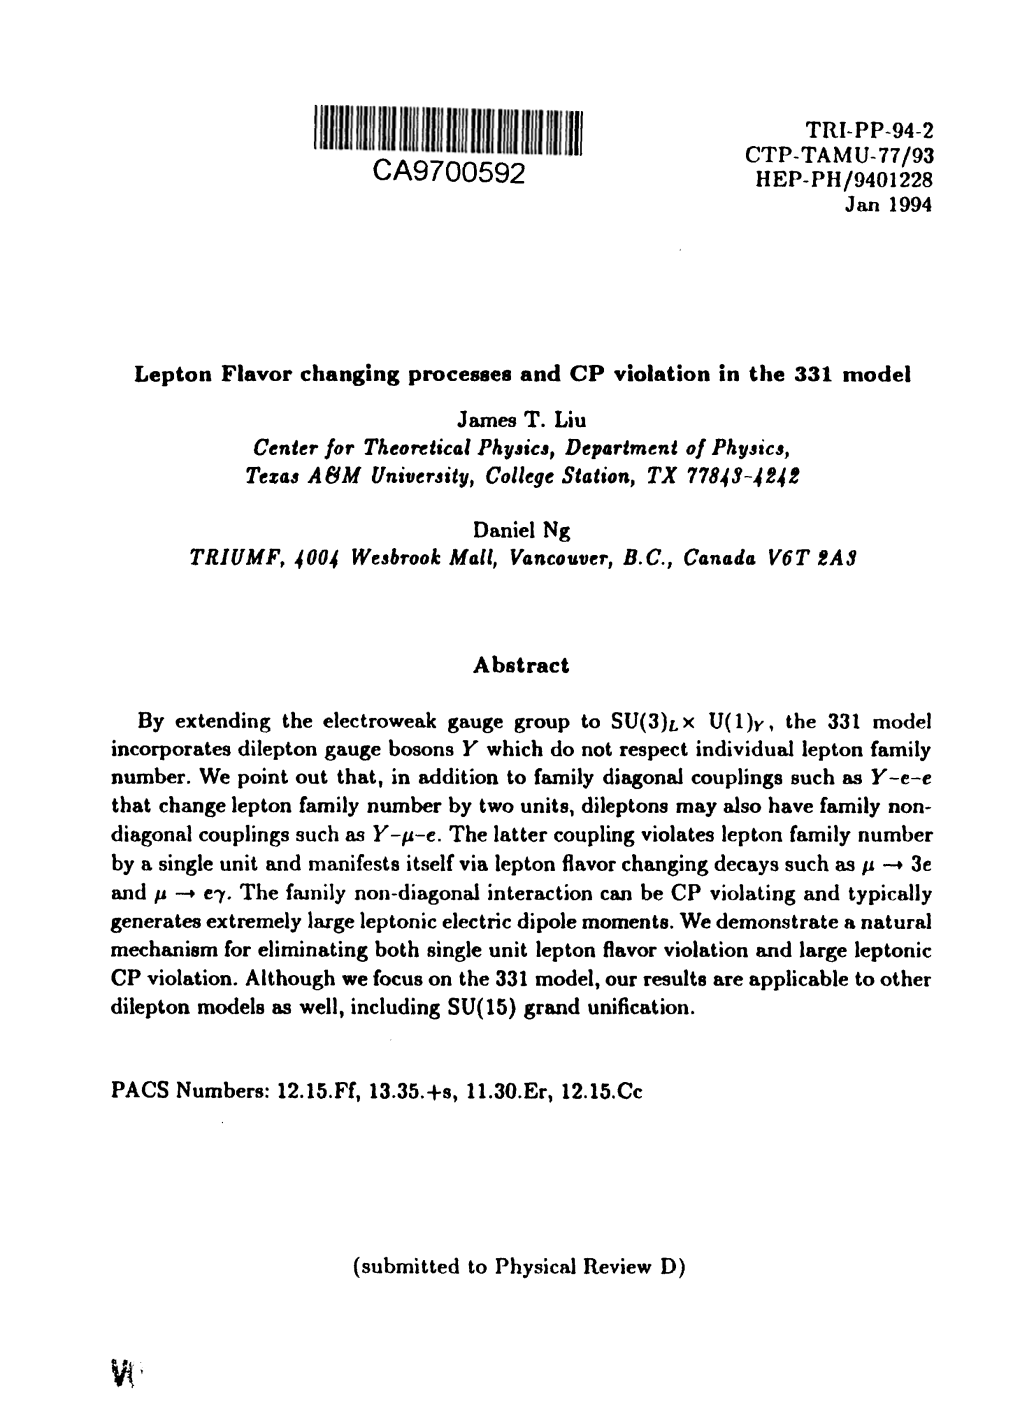 Lepton Flavor Changing Processes and CP Violation in the 331 Model